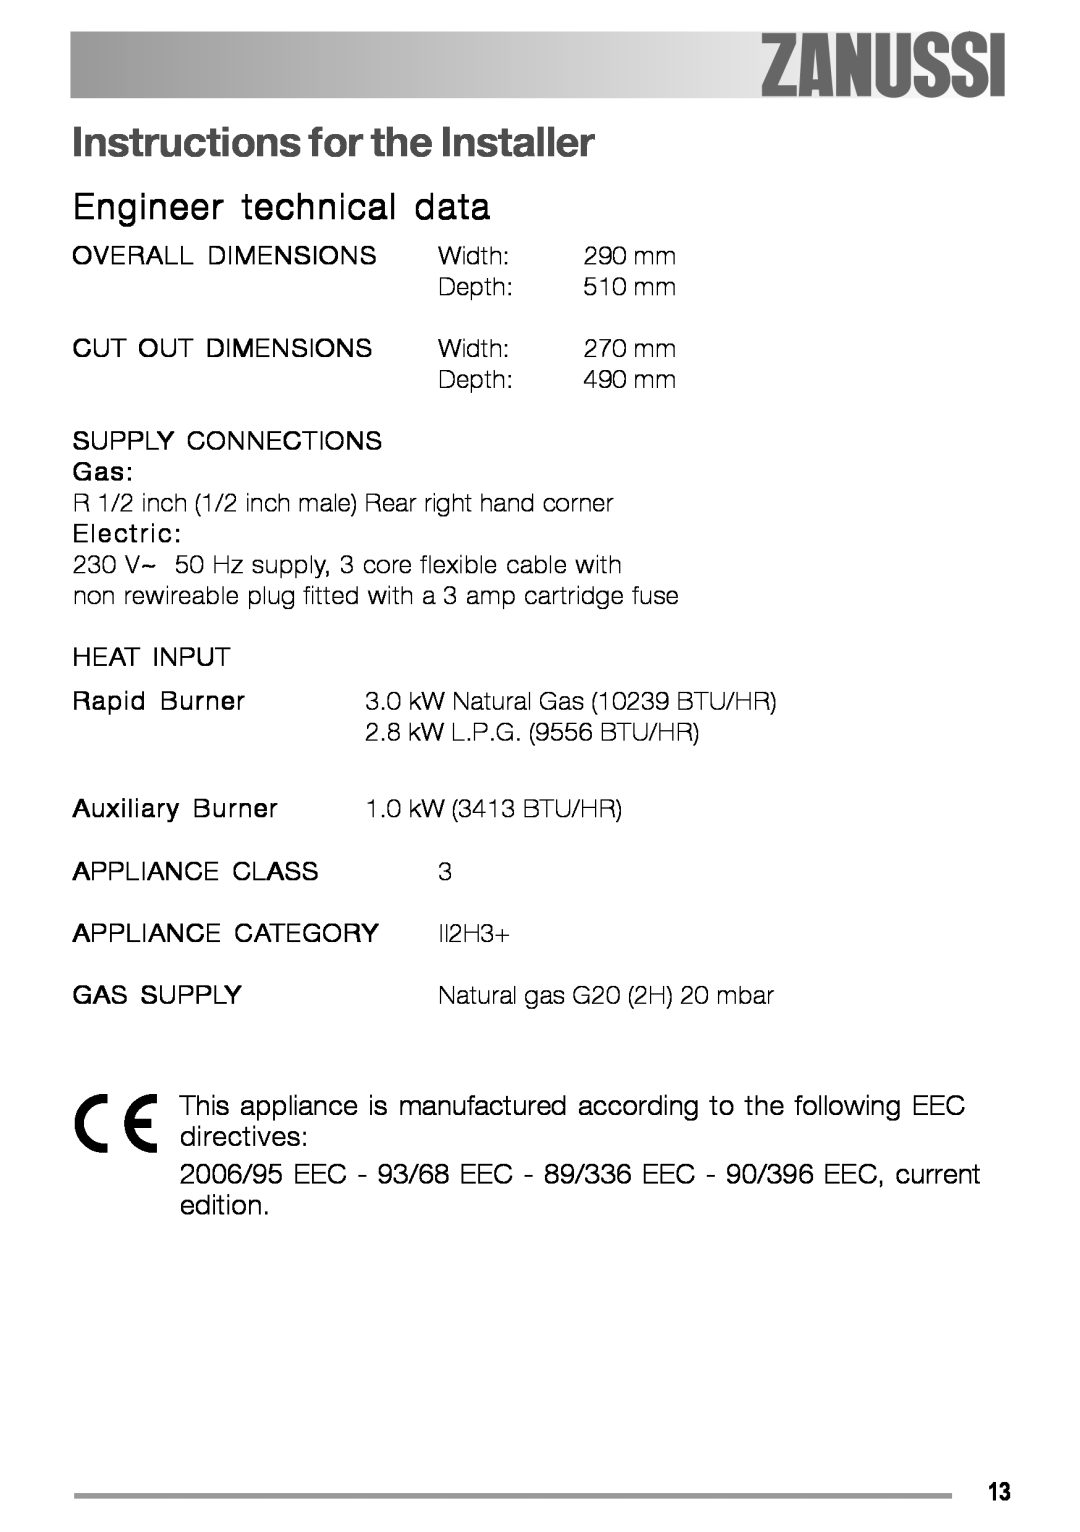 Zanussi ZGS 322 Instructions for the Installer, Engineer technical data, Overall Dimensions, Cut Out Dimensions, Electric 